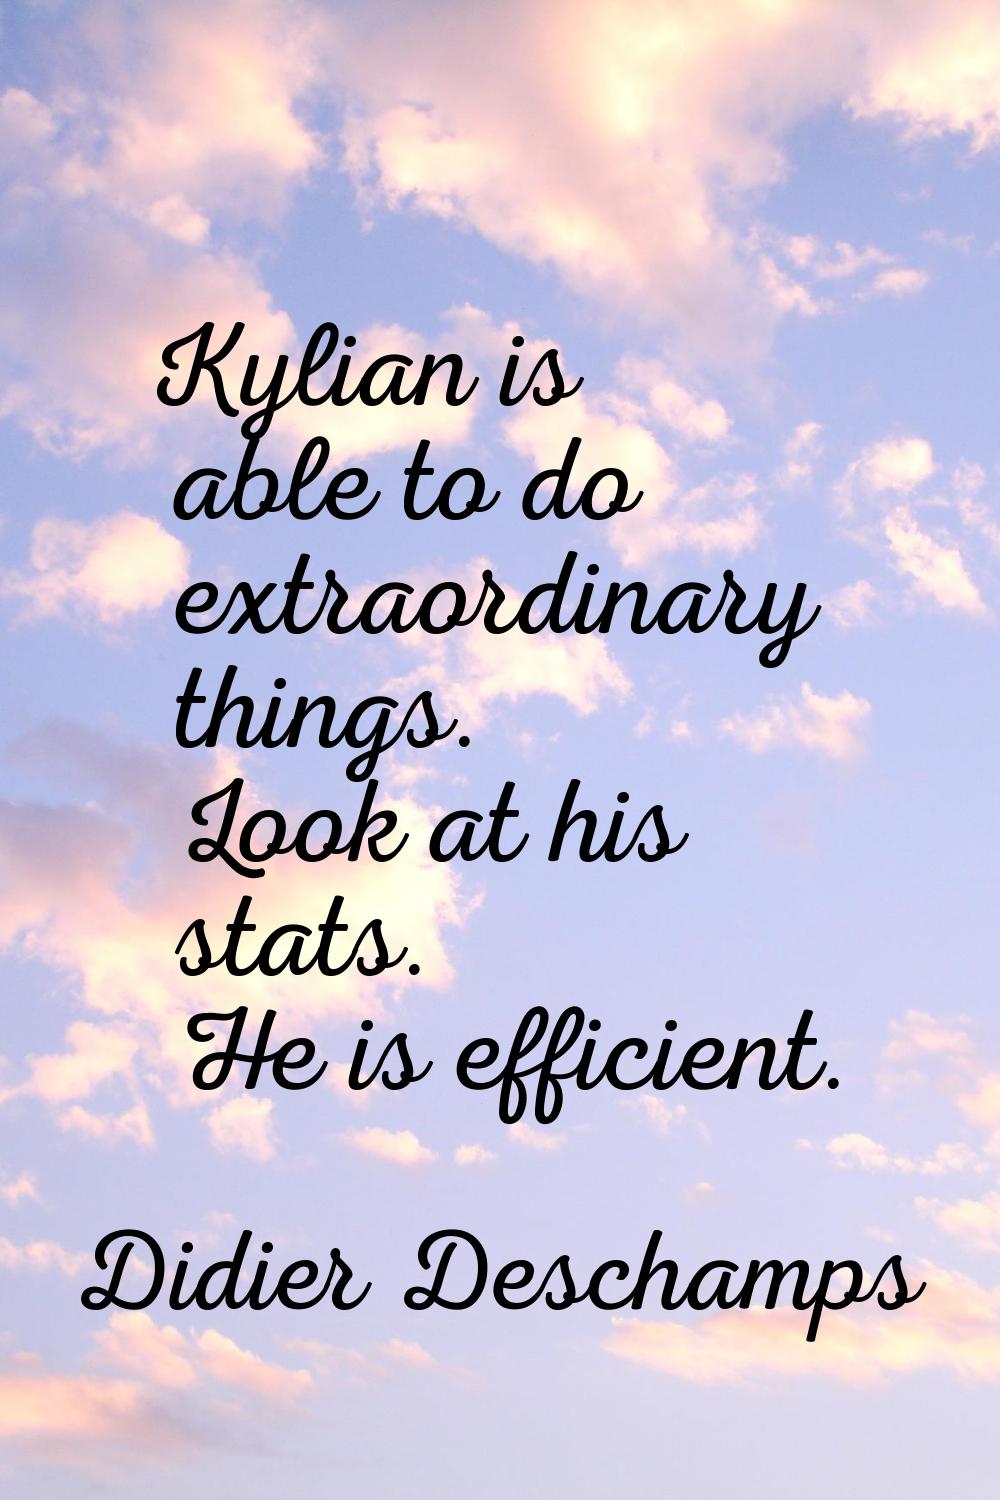 Kylian is able to do extraordinary things. Look at his stats. He is efficient.